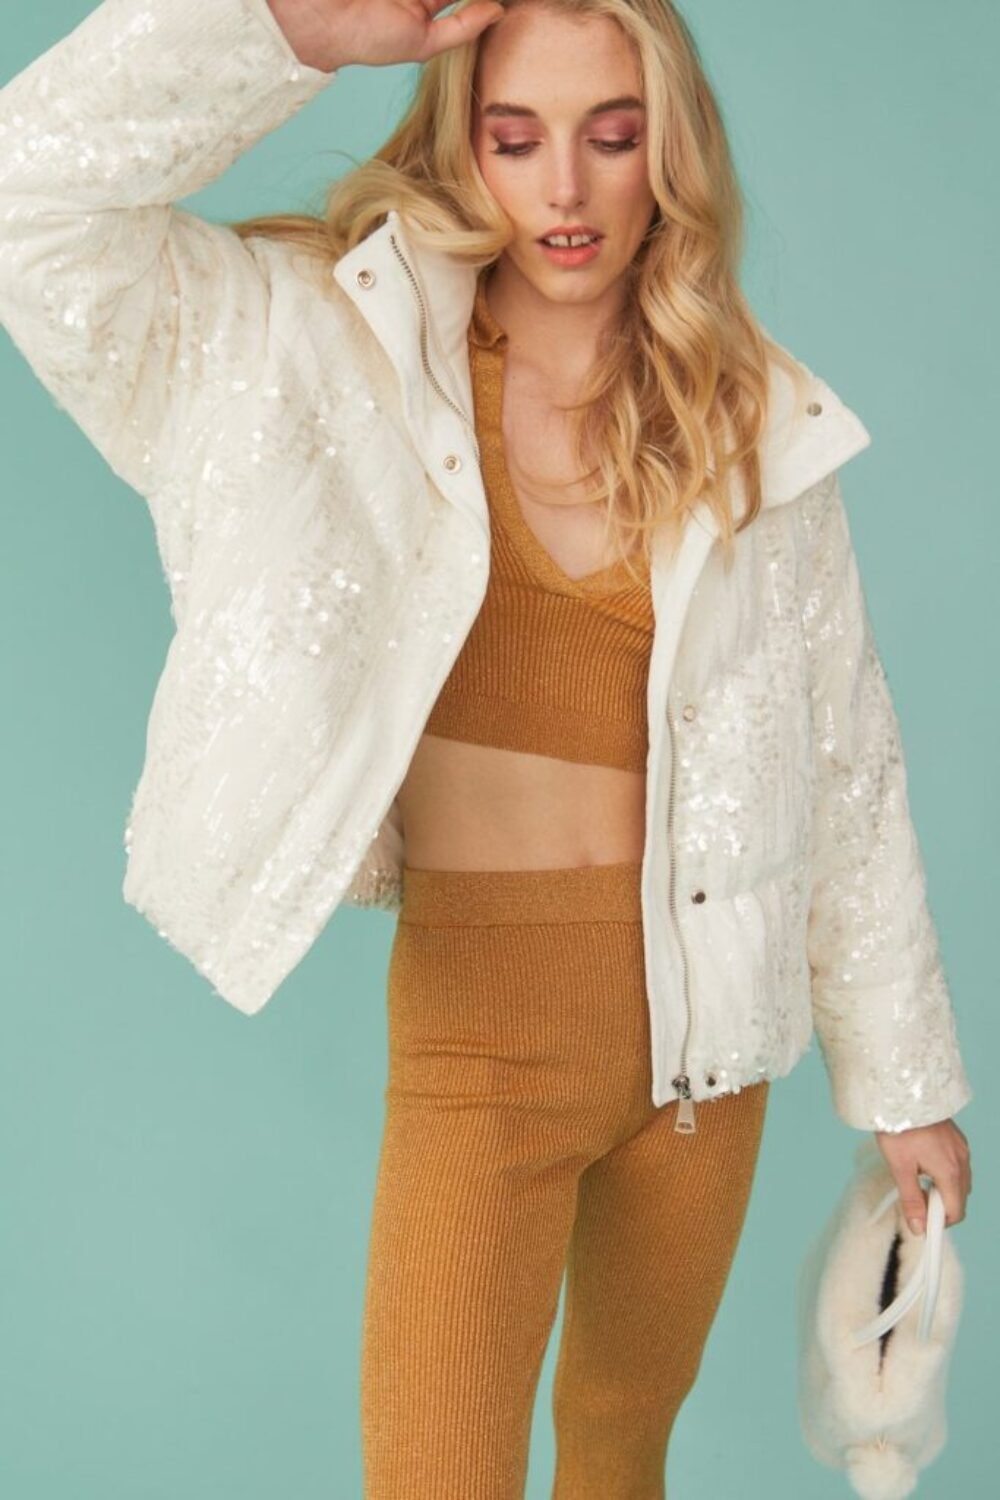 Shop Lux White Sequin Puffer Jacket and women's luxury and designer clothes at www.lux-apparel.co.uk